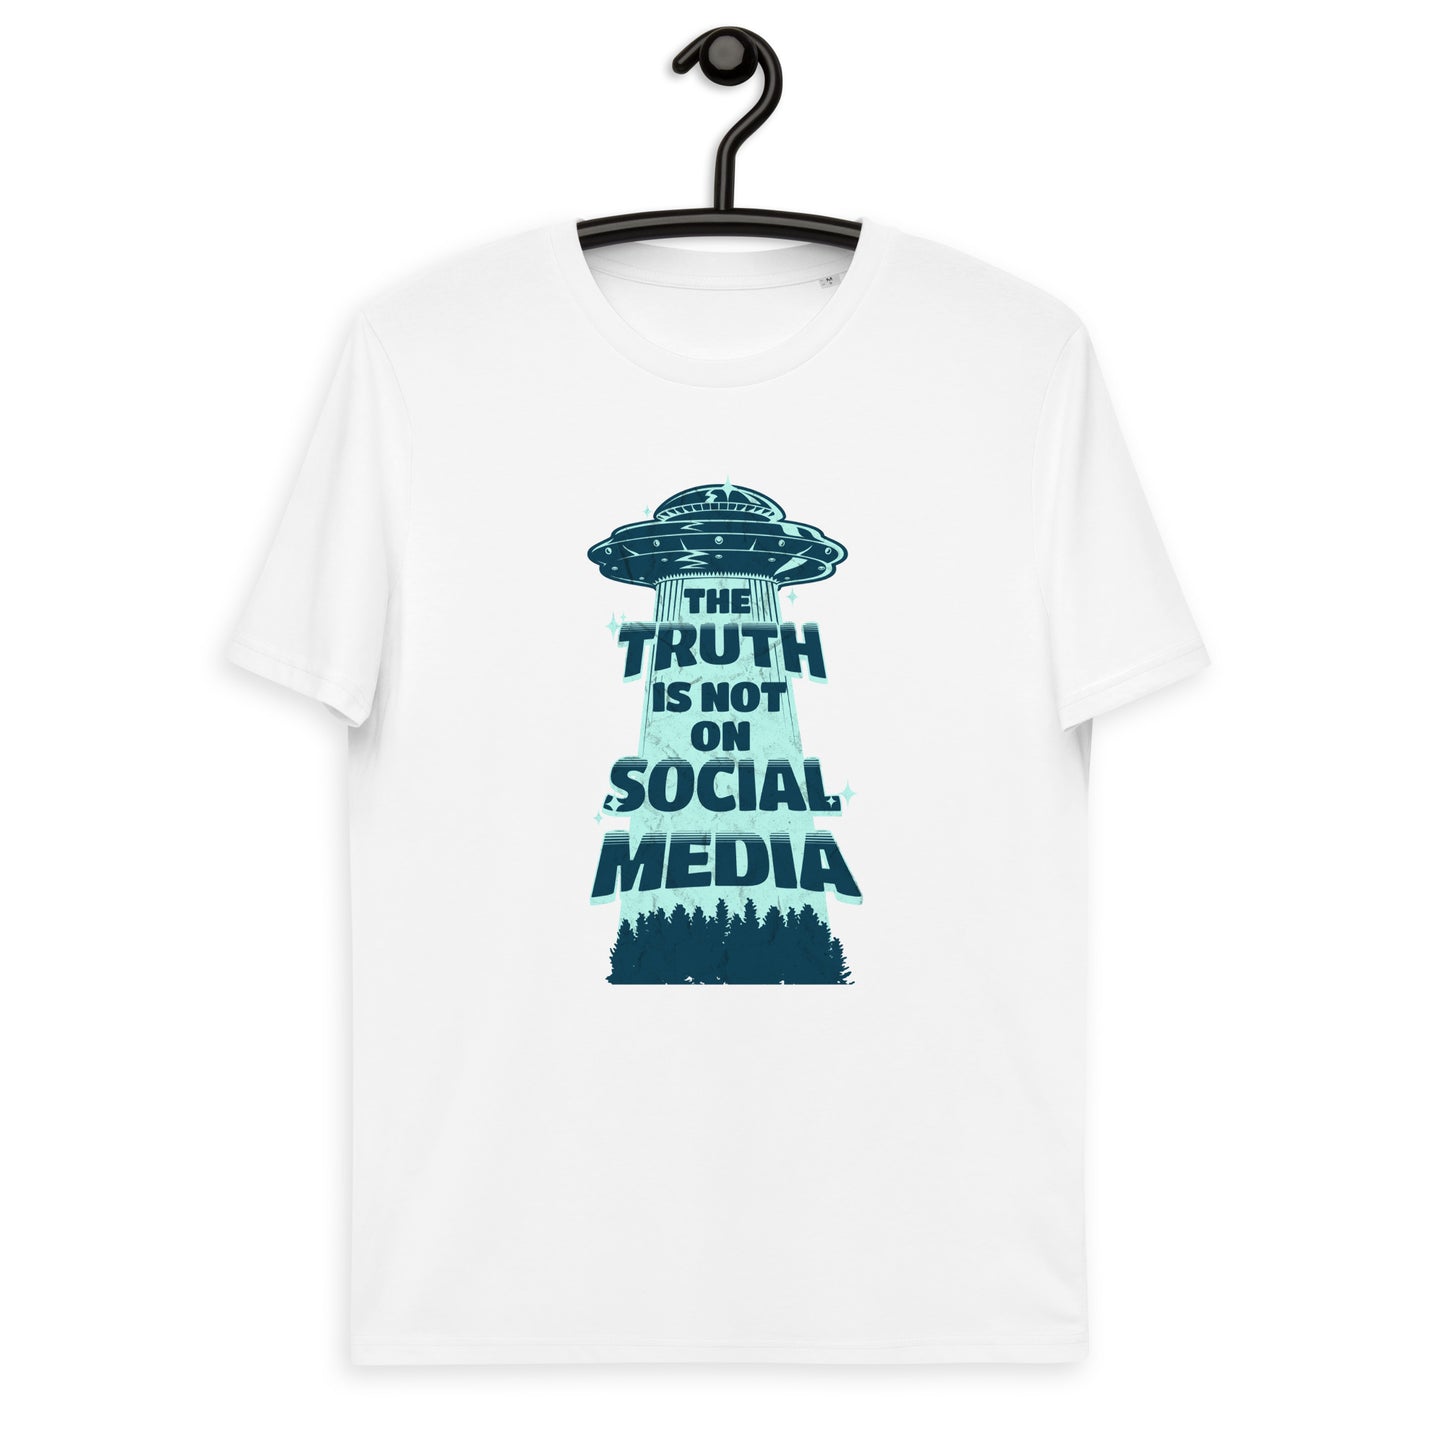 Unisex organic cotton t-shirt - The Truth Is Not On Social Media